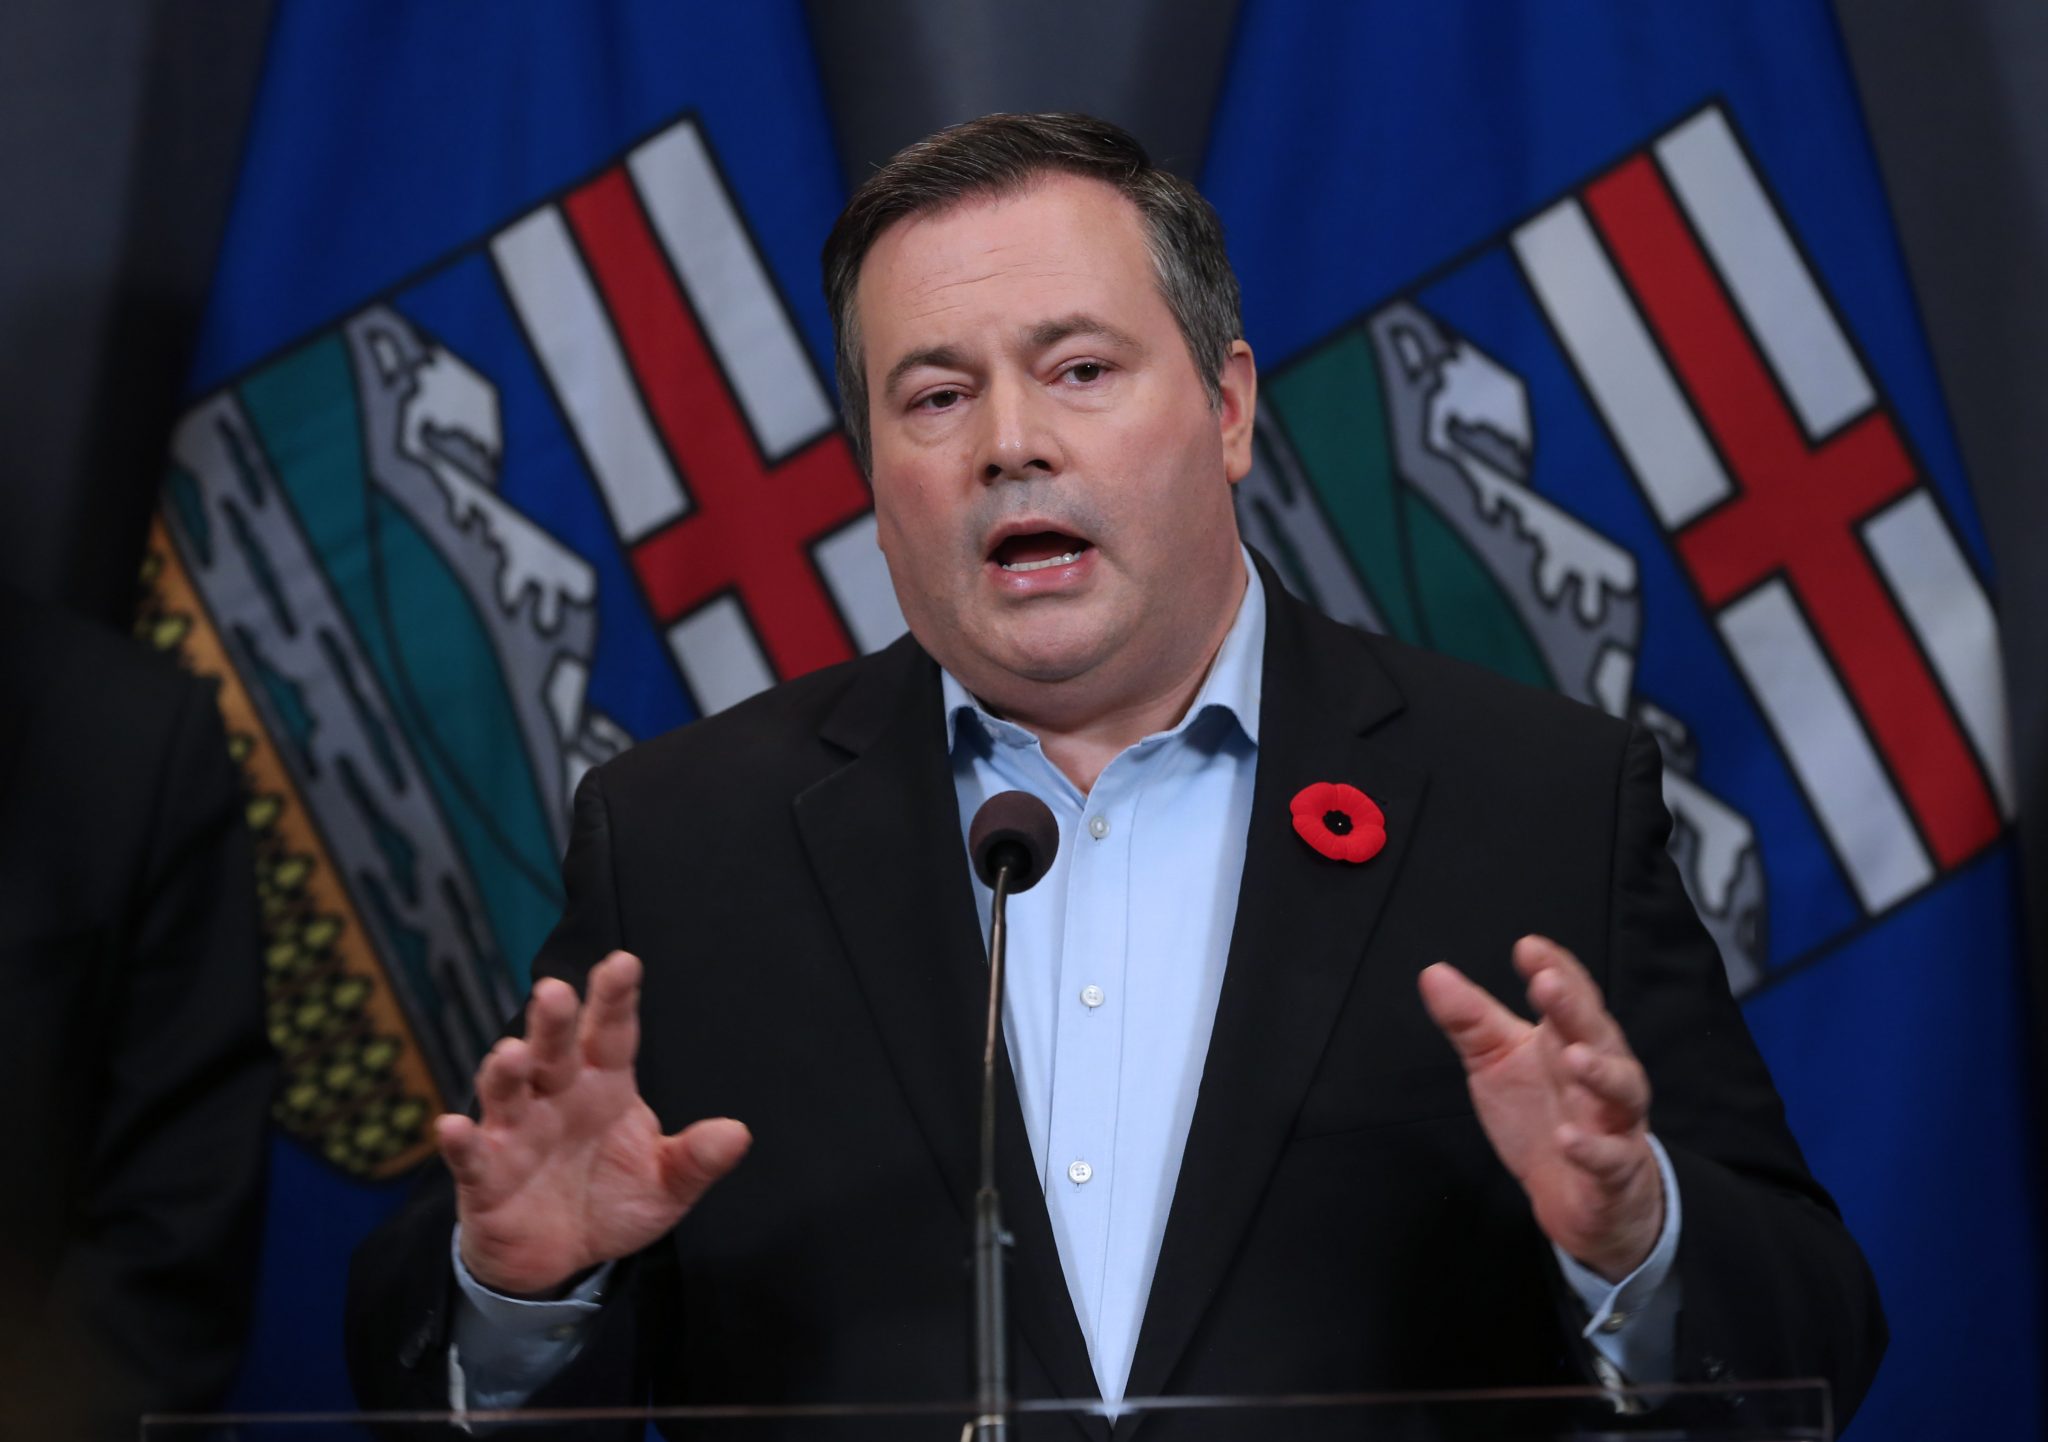 United Conservative Party- The immigration proposal of Alberta allows 40,000 newcomers to the rural communities